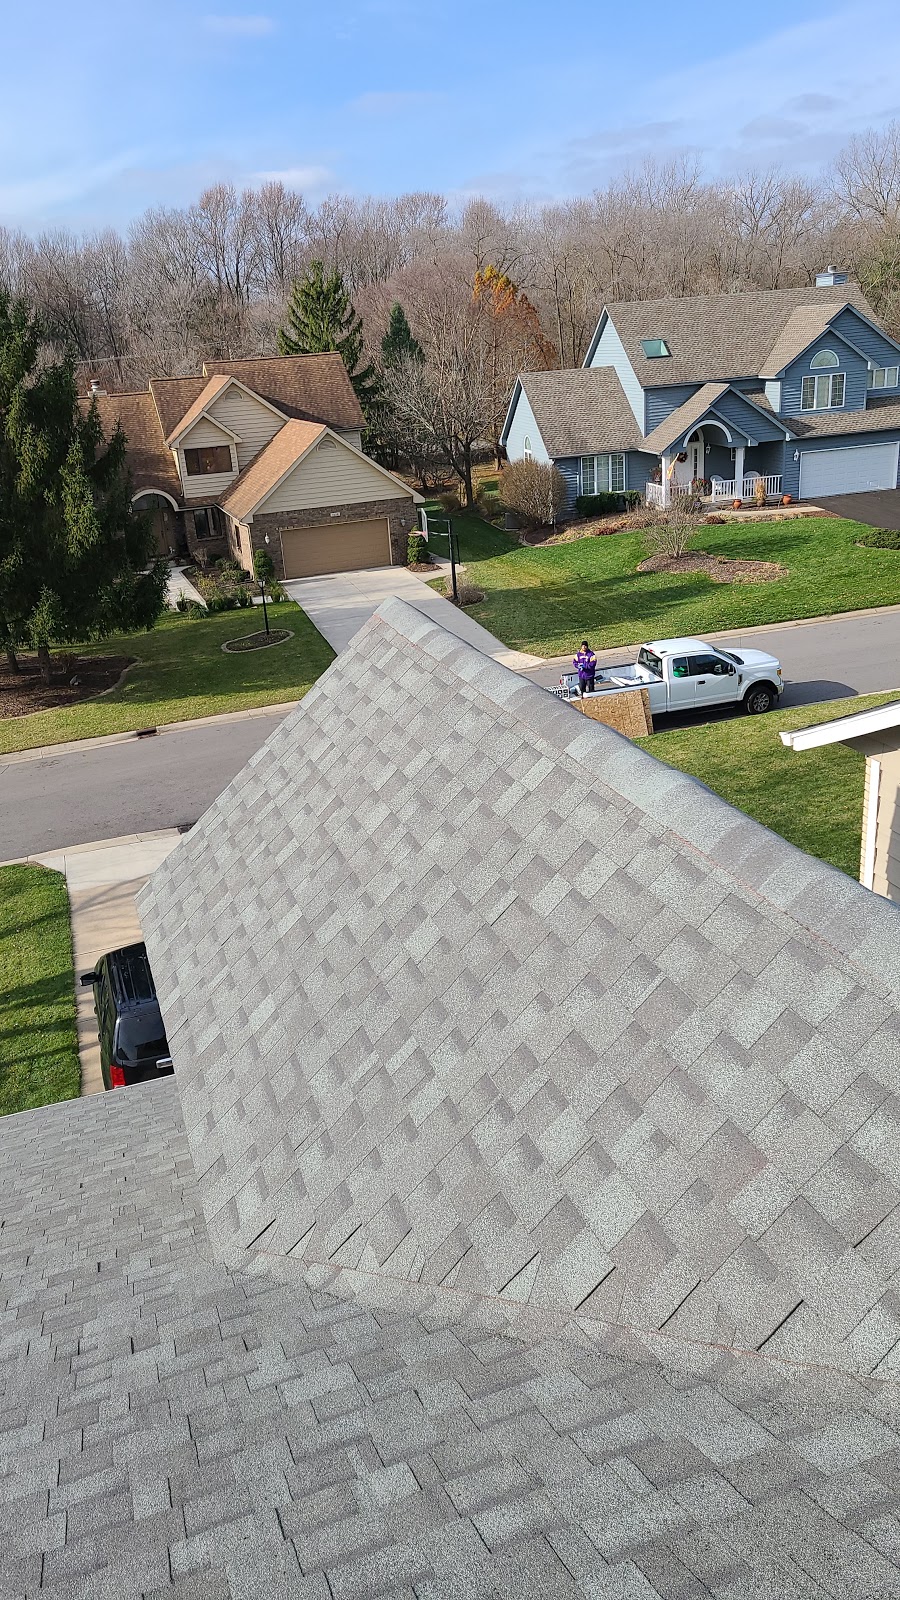 Region Roofing & Remodeling Inc | 5539 Indianapolis Blvd REAR BLD, East Chicago, IN 46312, USA | Phone: (219) 629-8344